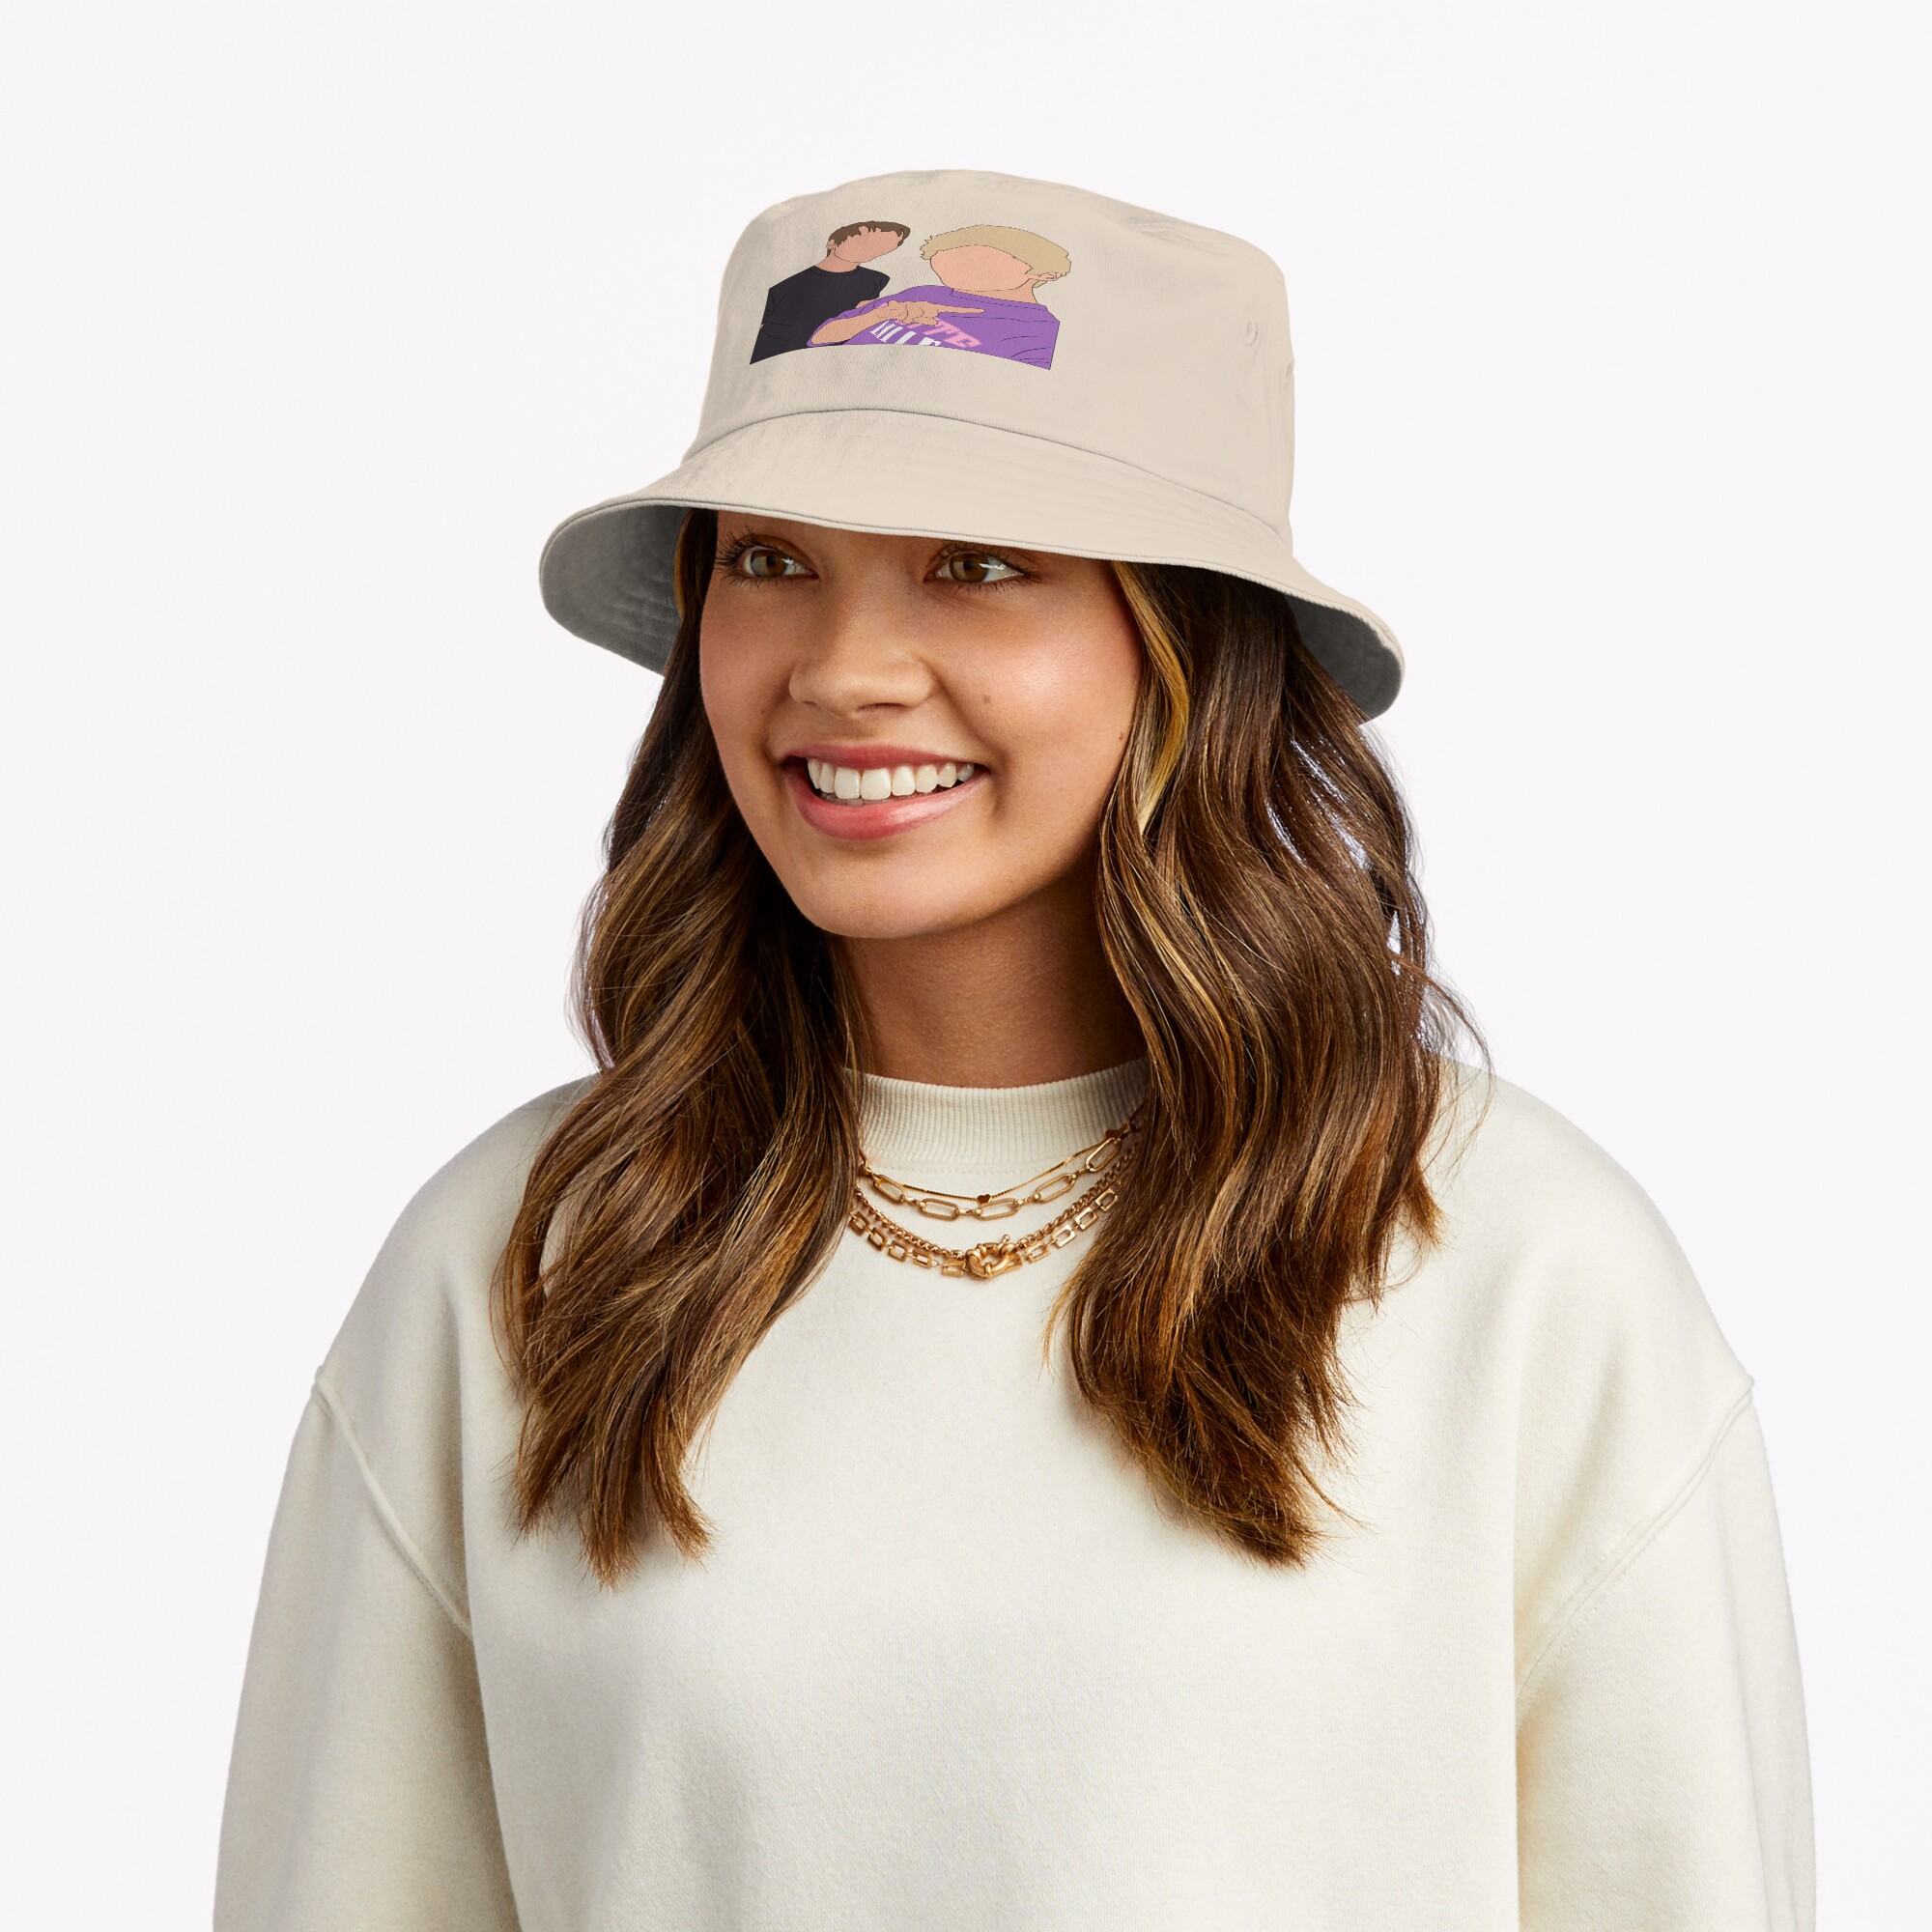 ssrcobucket hatwomense5d6c5f62bbf65eefrontsquare2000x2000 bgf8f8f8 5 - Sam And Colby Shop